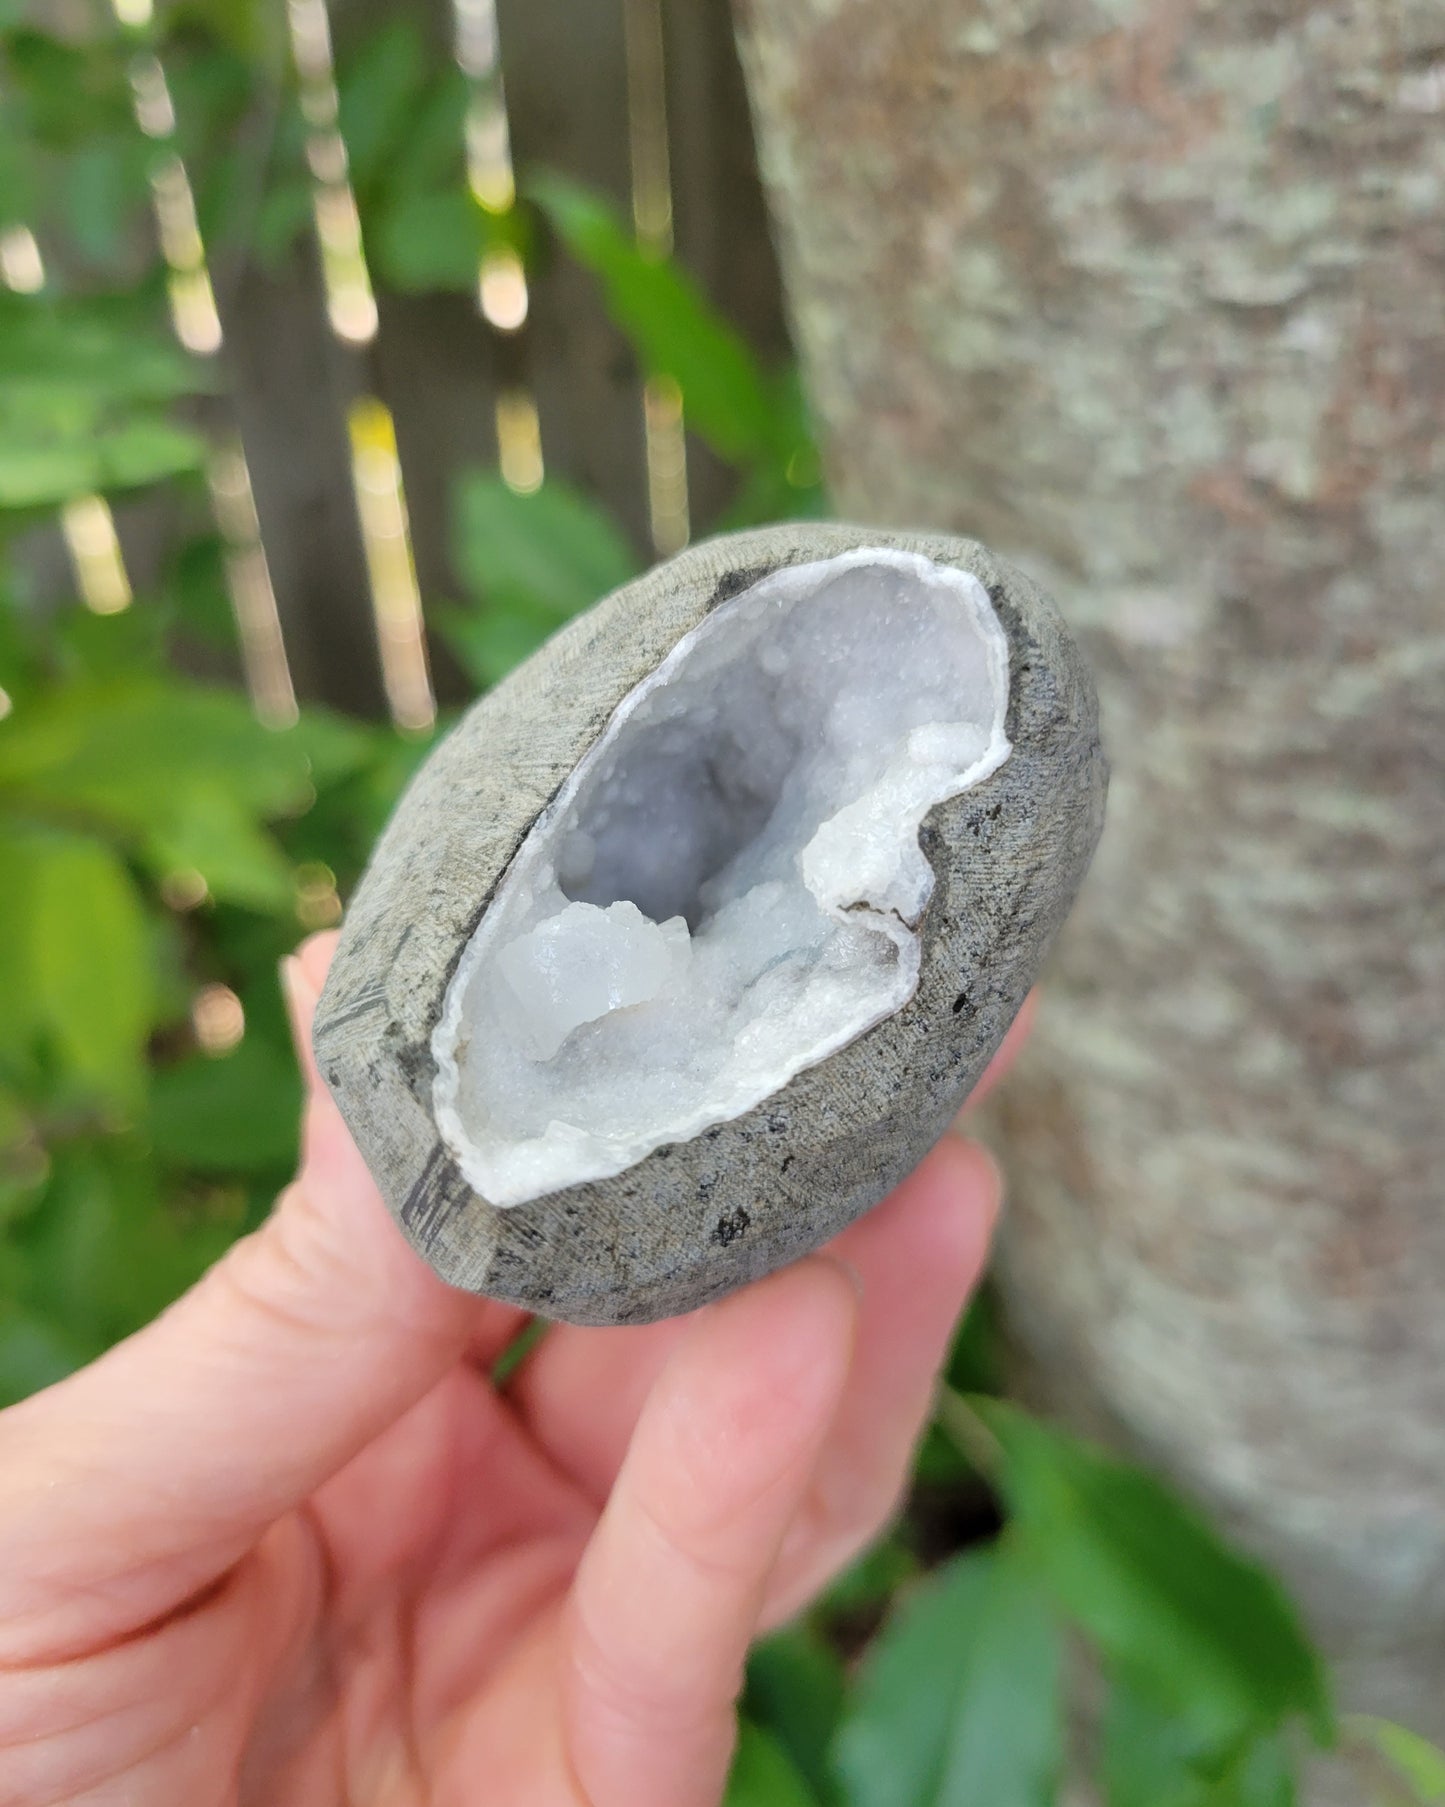 Chalcedony and Heulandite Geode from India